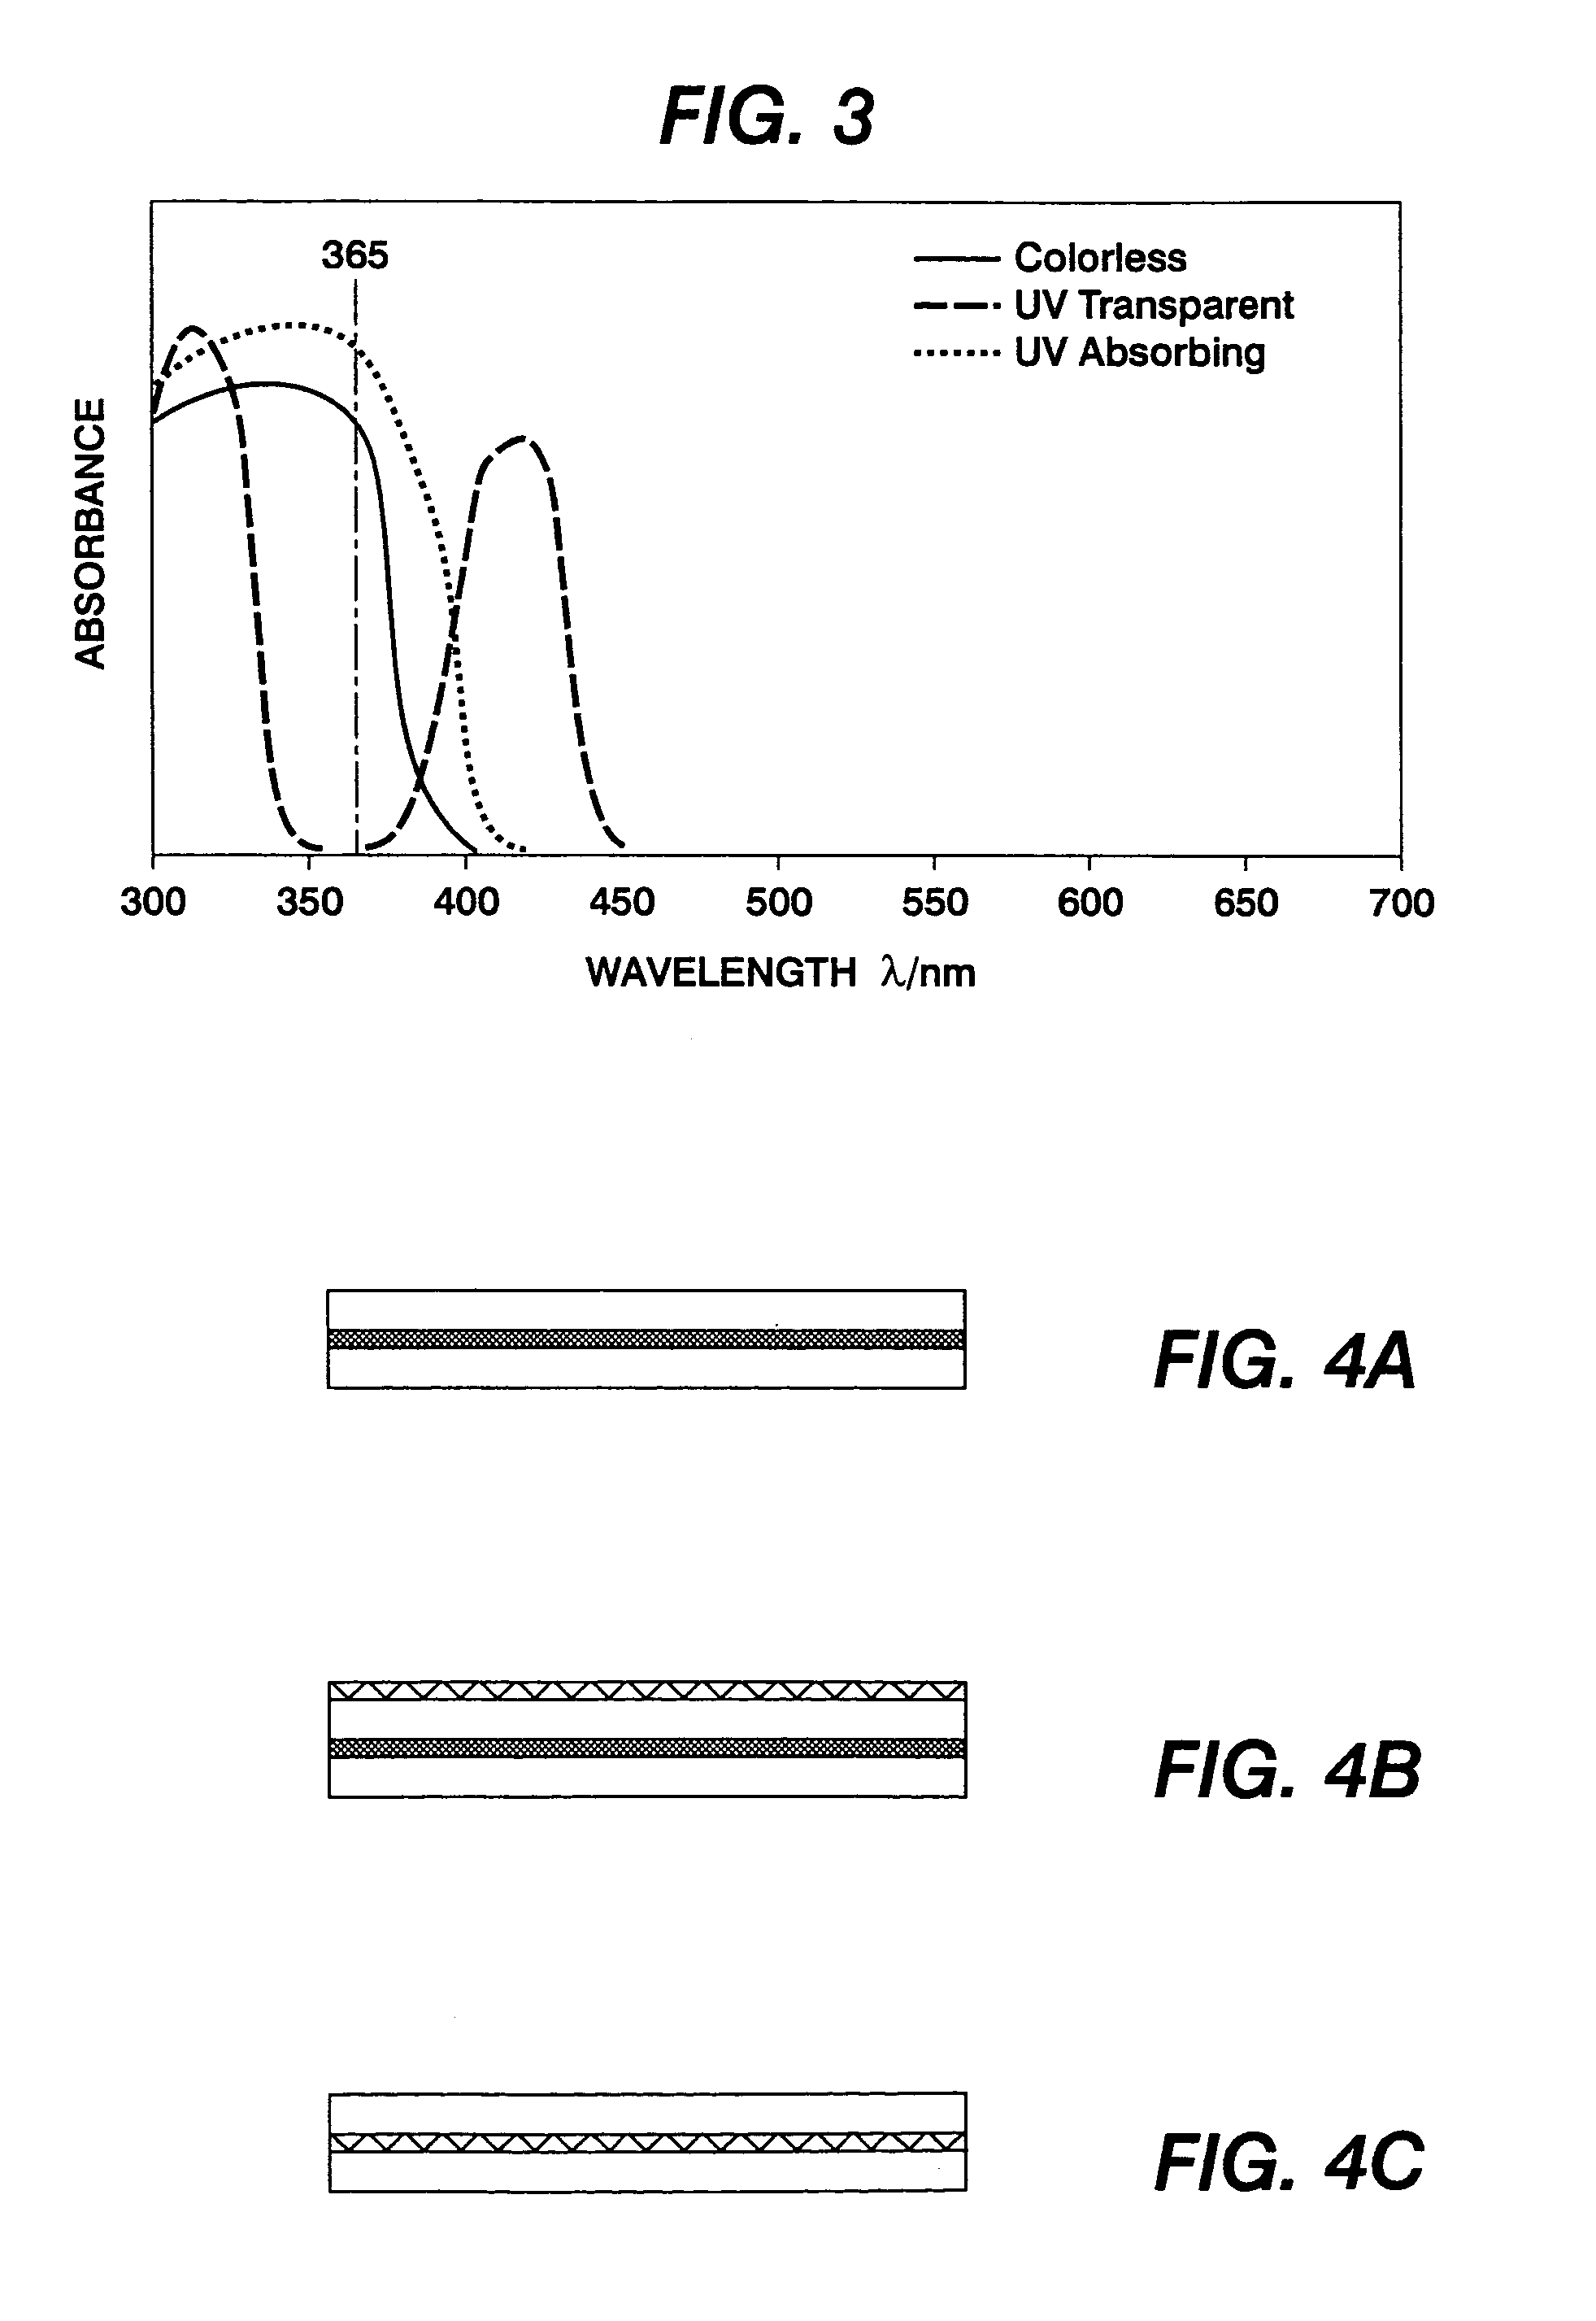 Protection of transient documents using a photochromic protective layer